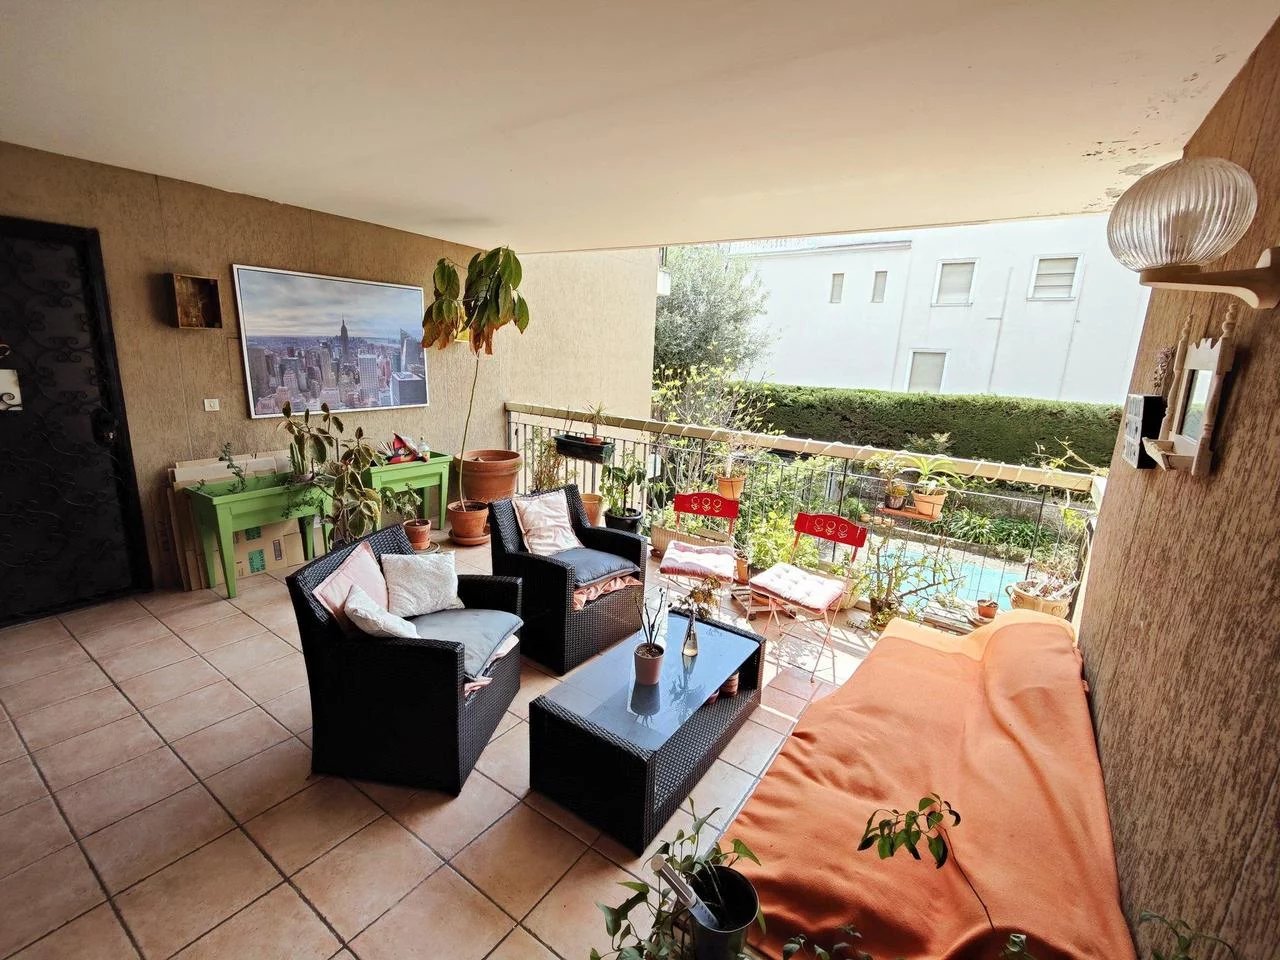 Appartement  3 Rooms 71.2m2  for sale   455 000 €